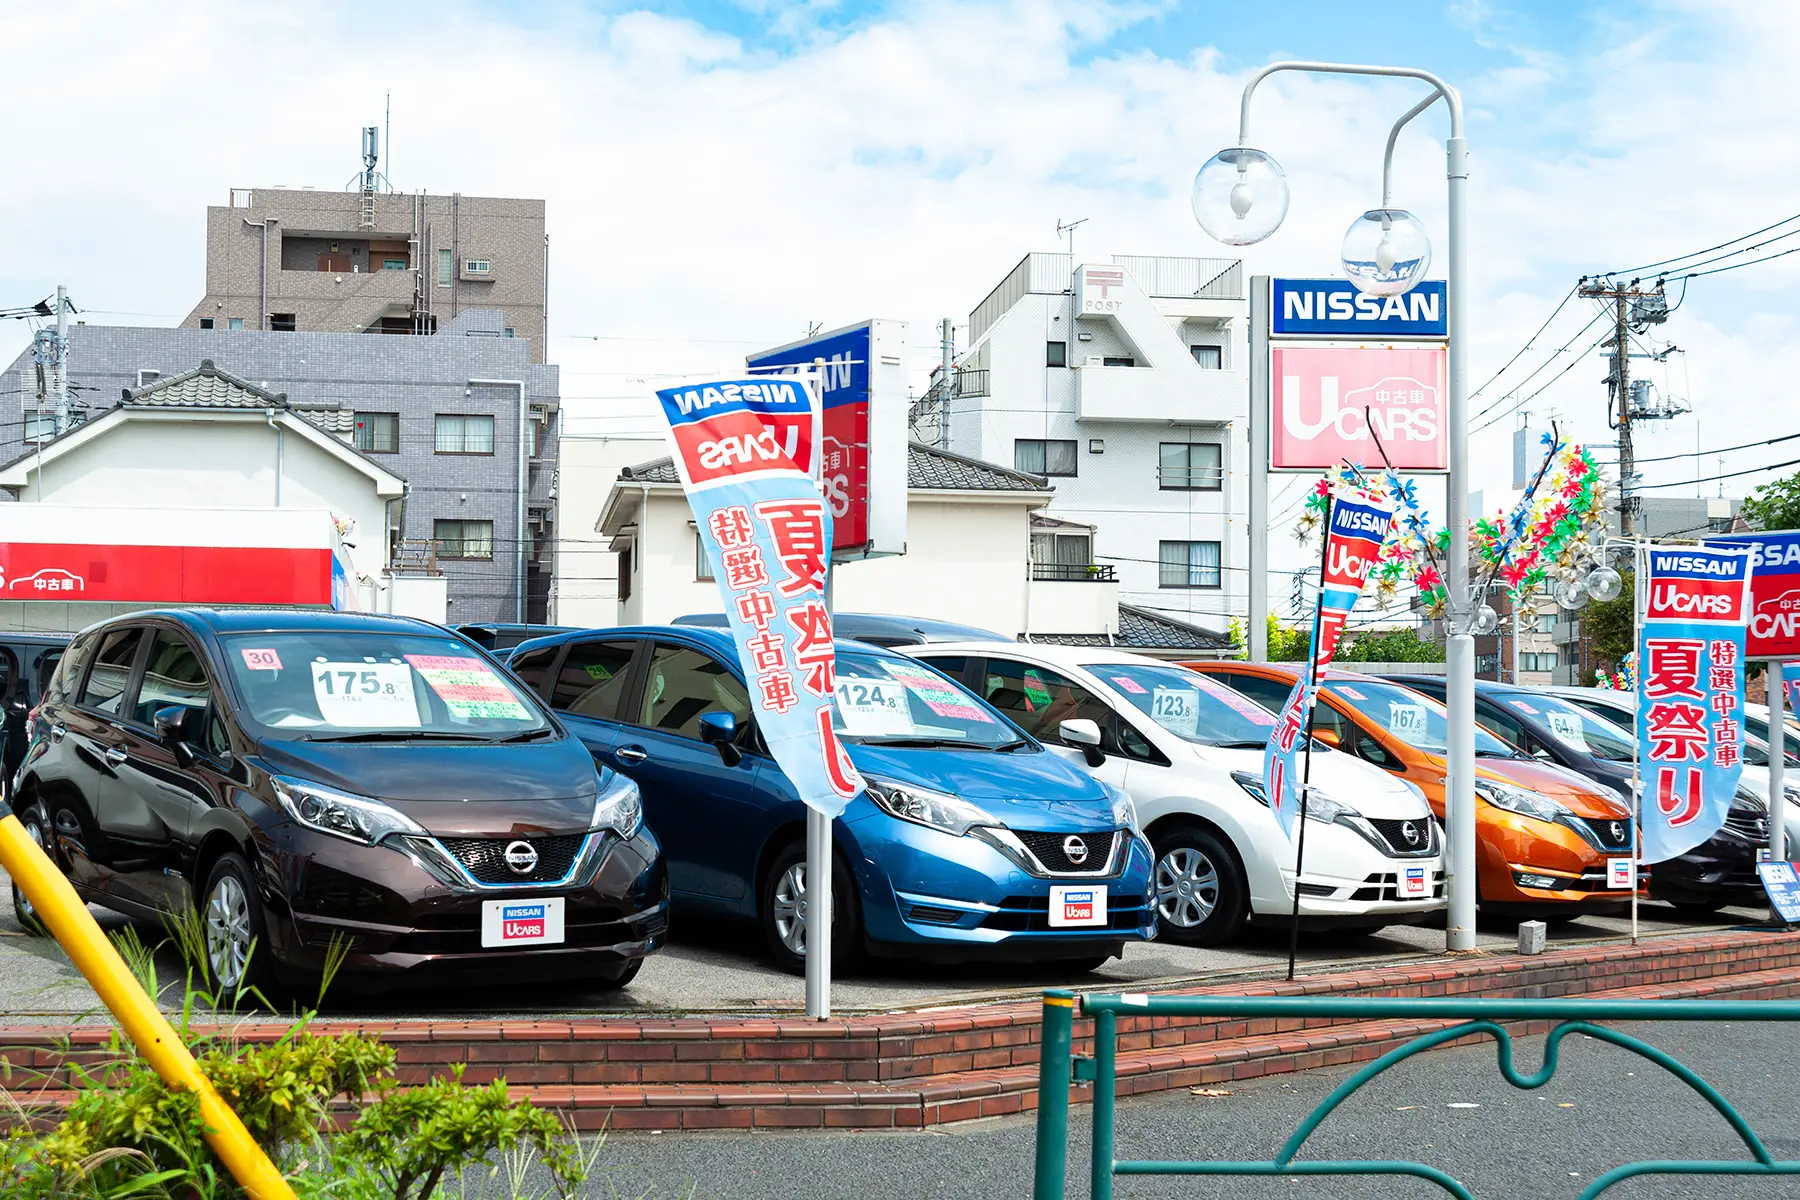 A used car dealership in Japan